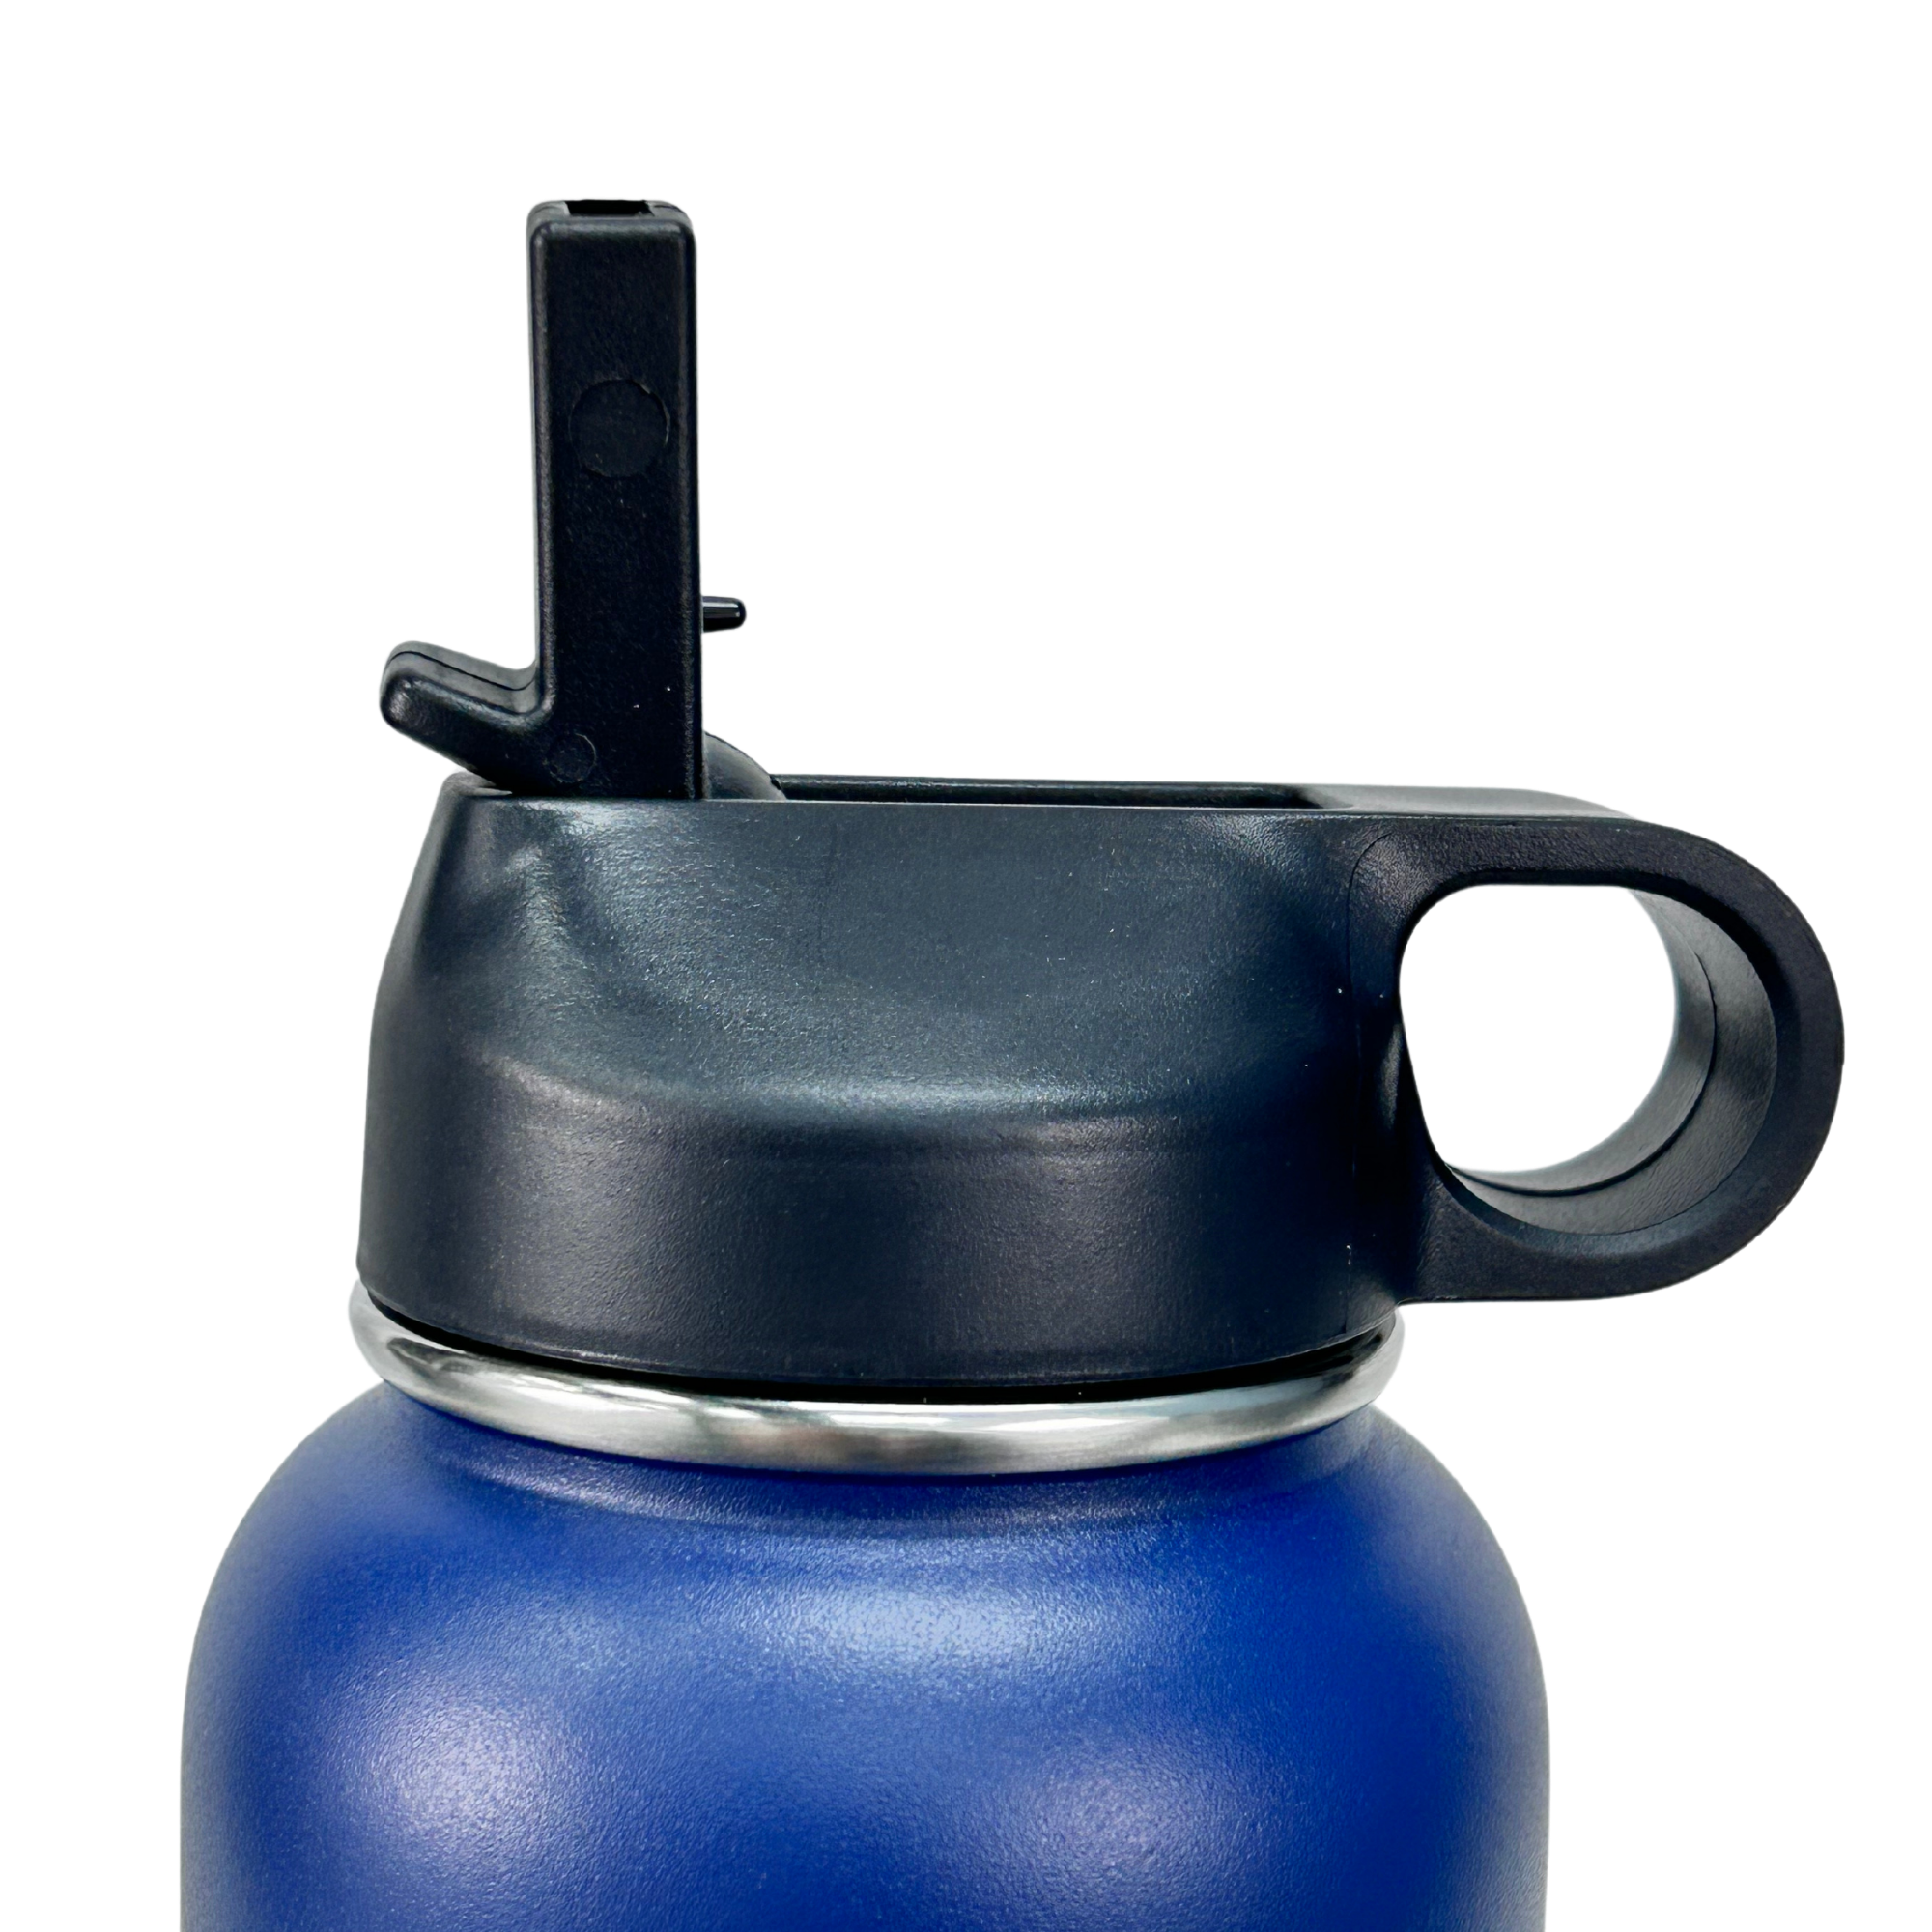 Under Armour 32oz Sideline Squeeze Bottle Navy 